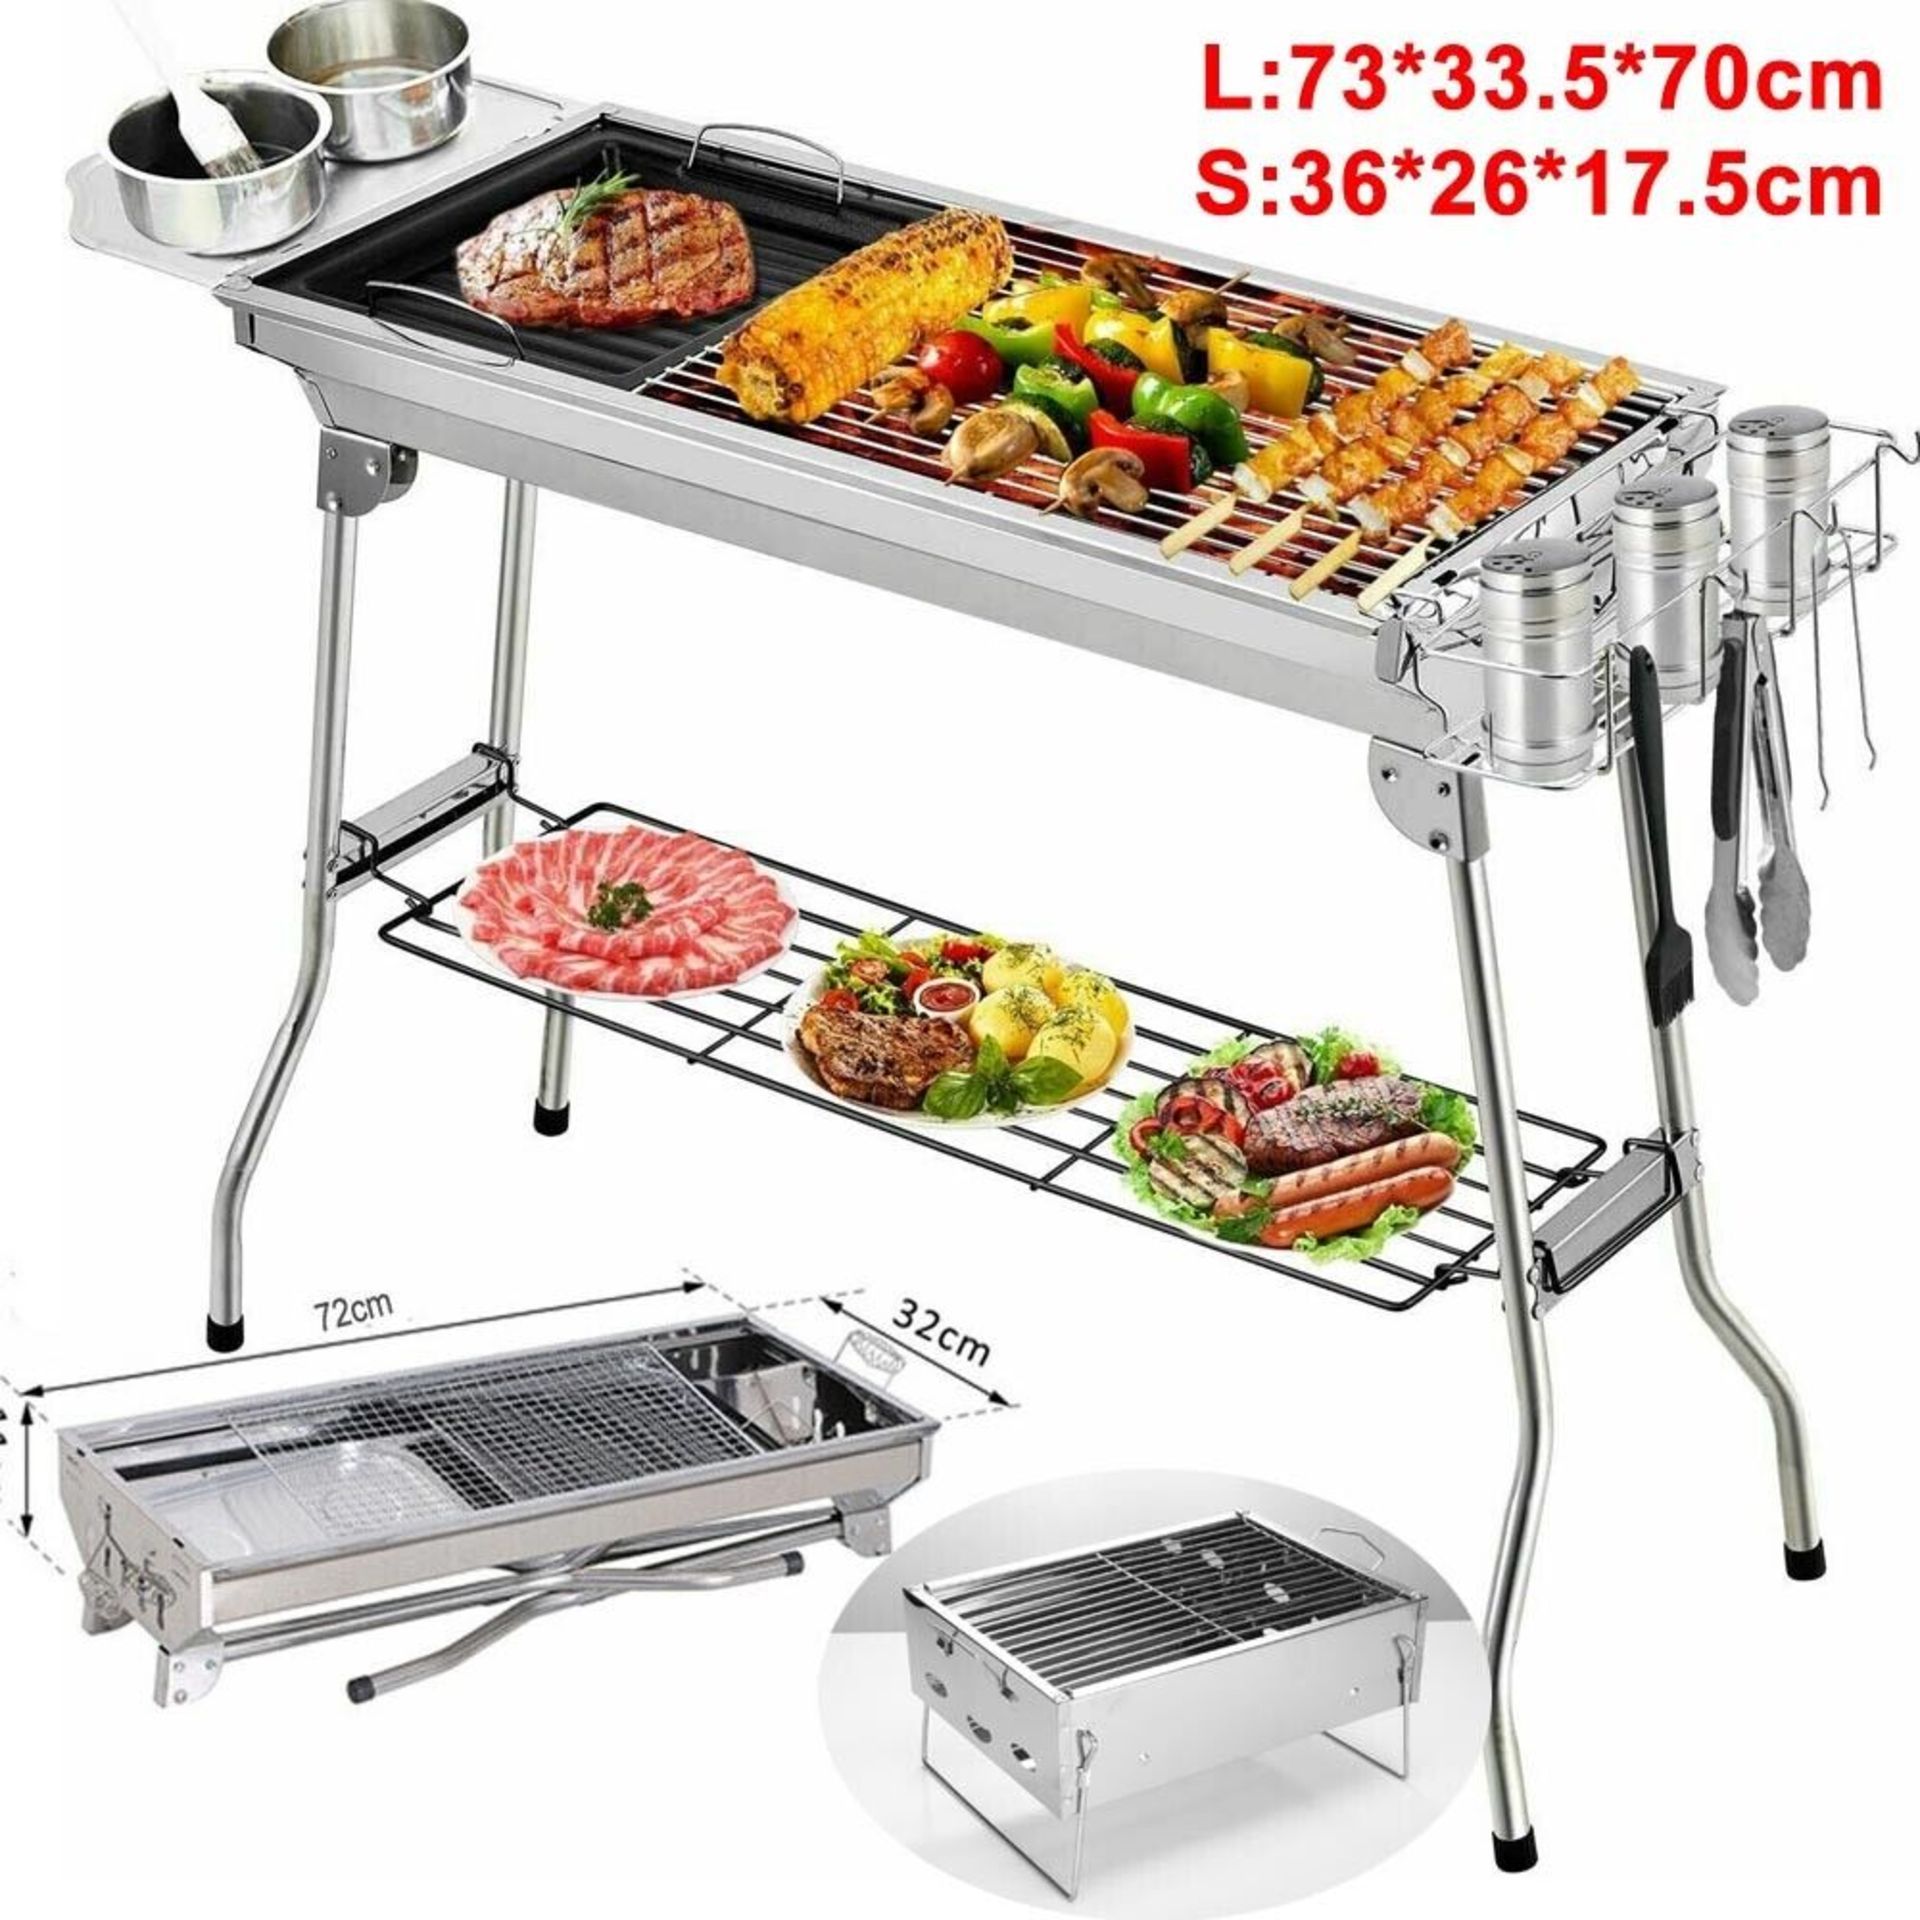 BRAND NEW LARGE BBQ GRILL WITH UNDER STORAGE SHELF RRP £220